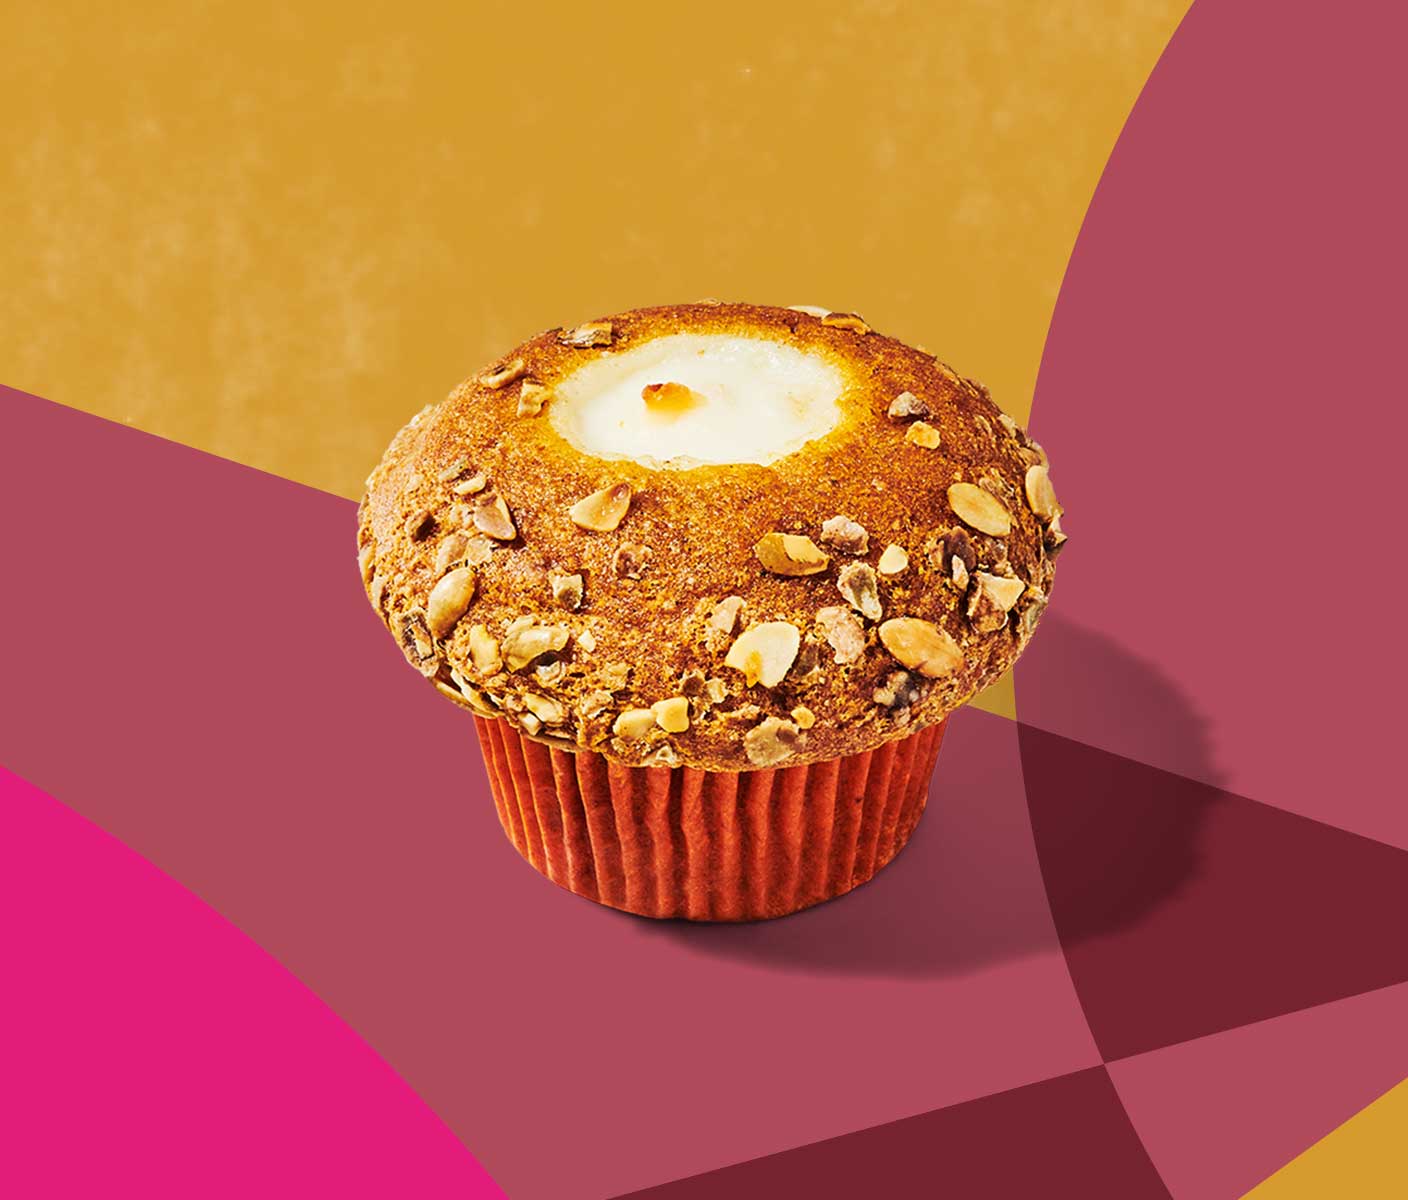 Overhead shot of a round muffin with a nutty topping and cream cheese showing through the top.